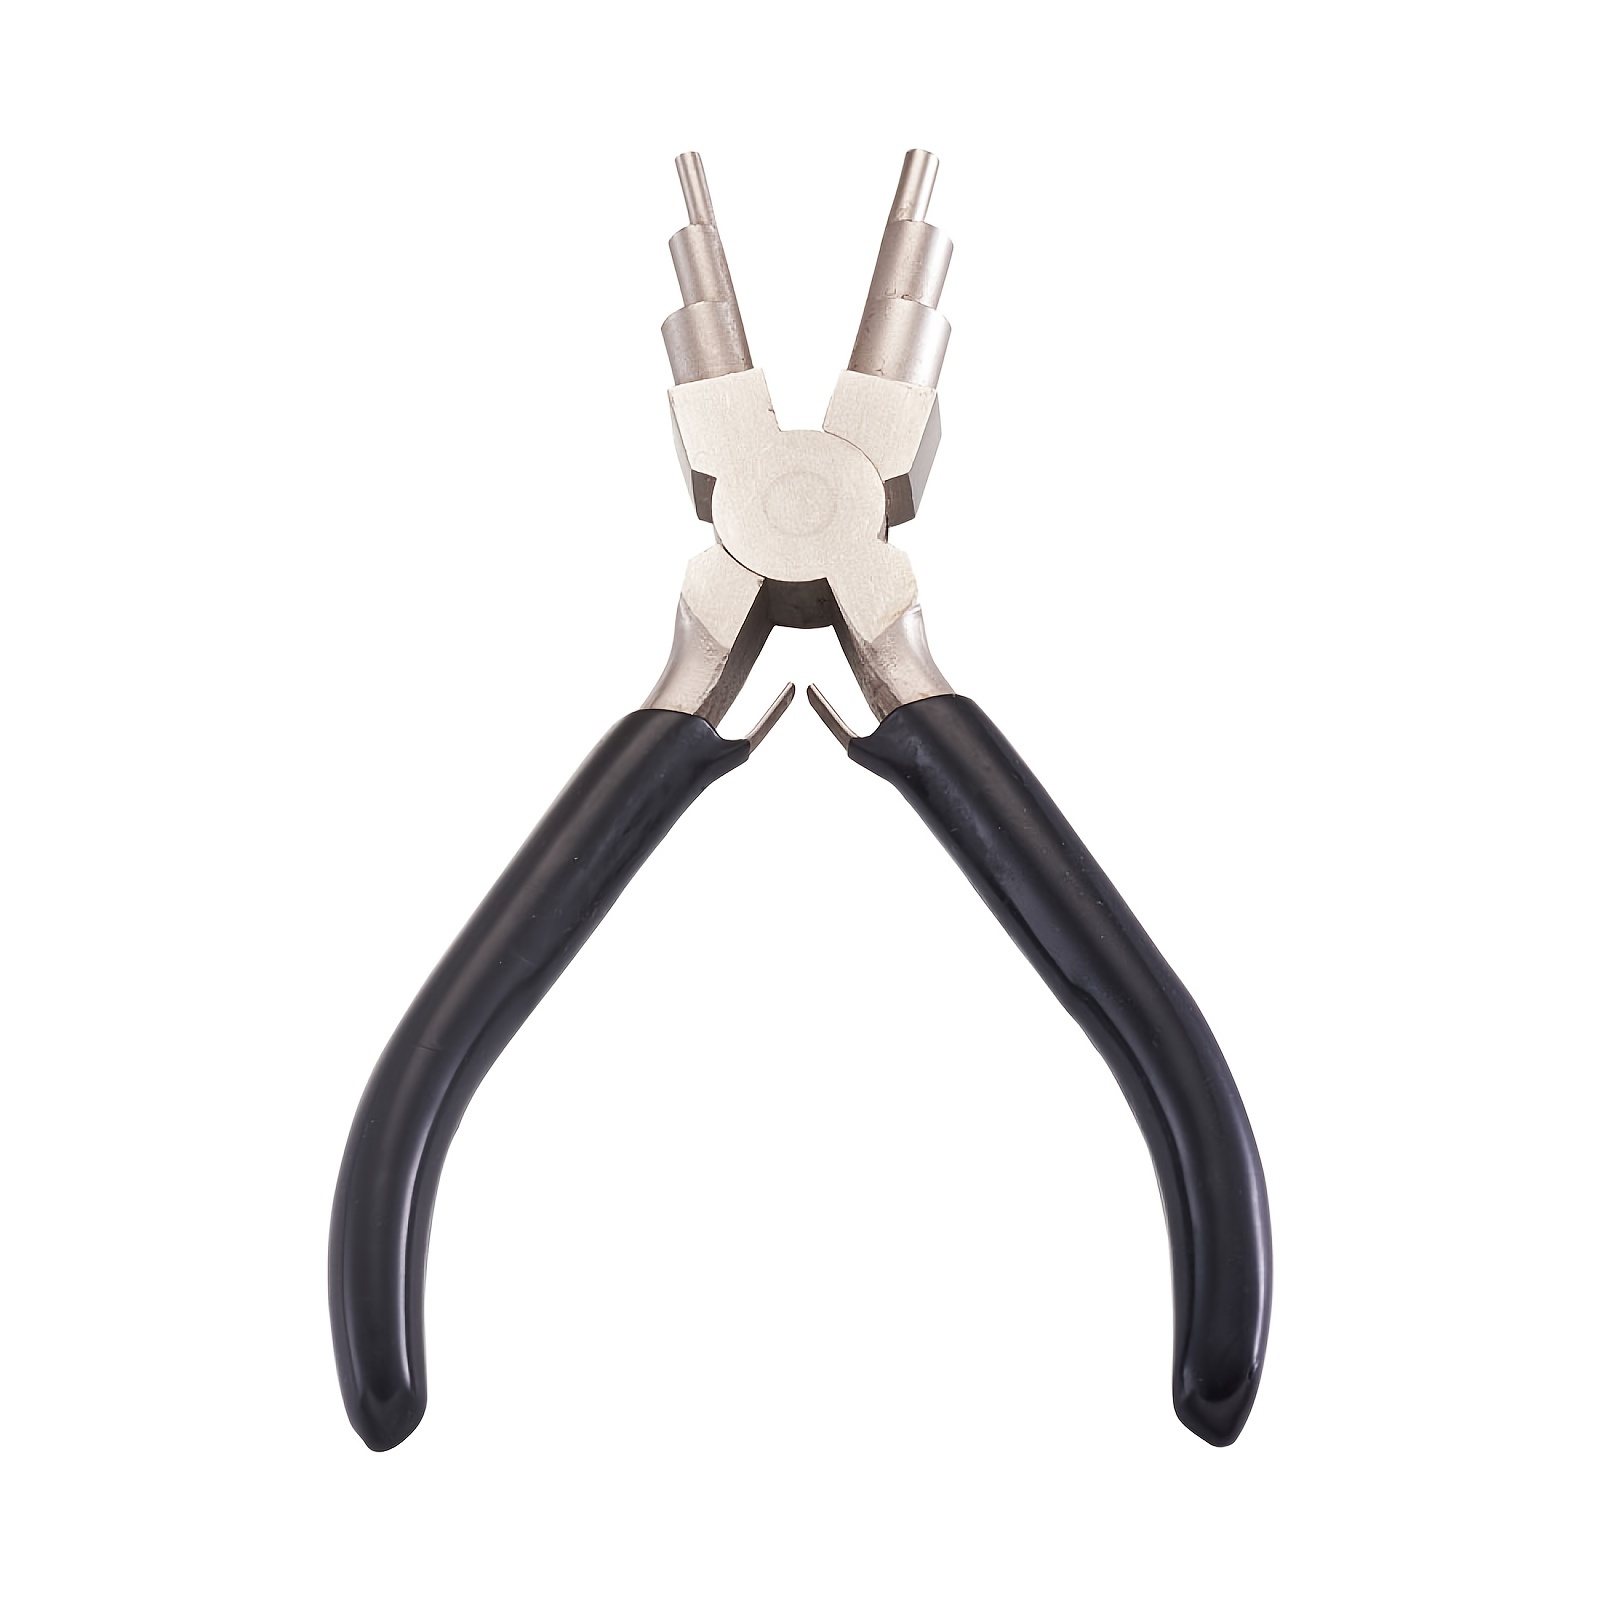 How to Use Multi-Sized Looping Pliers